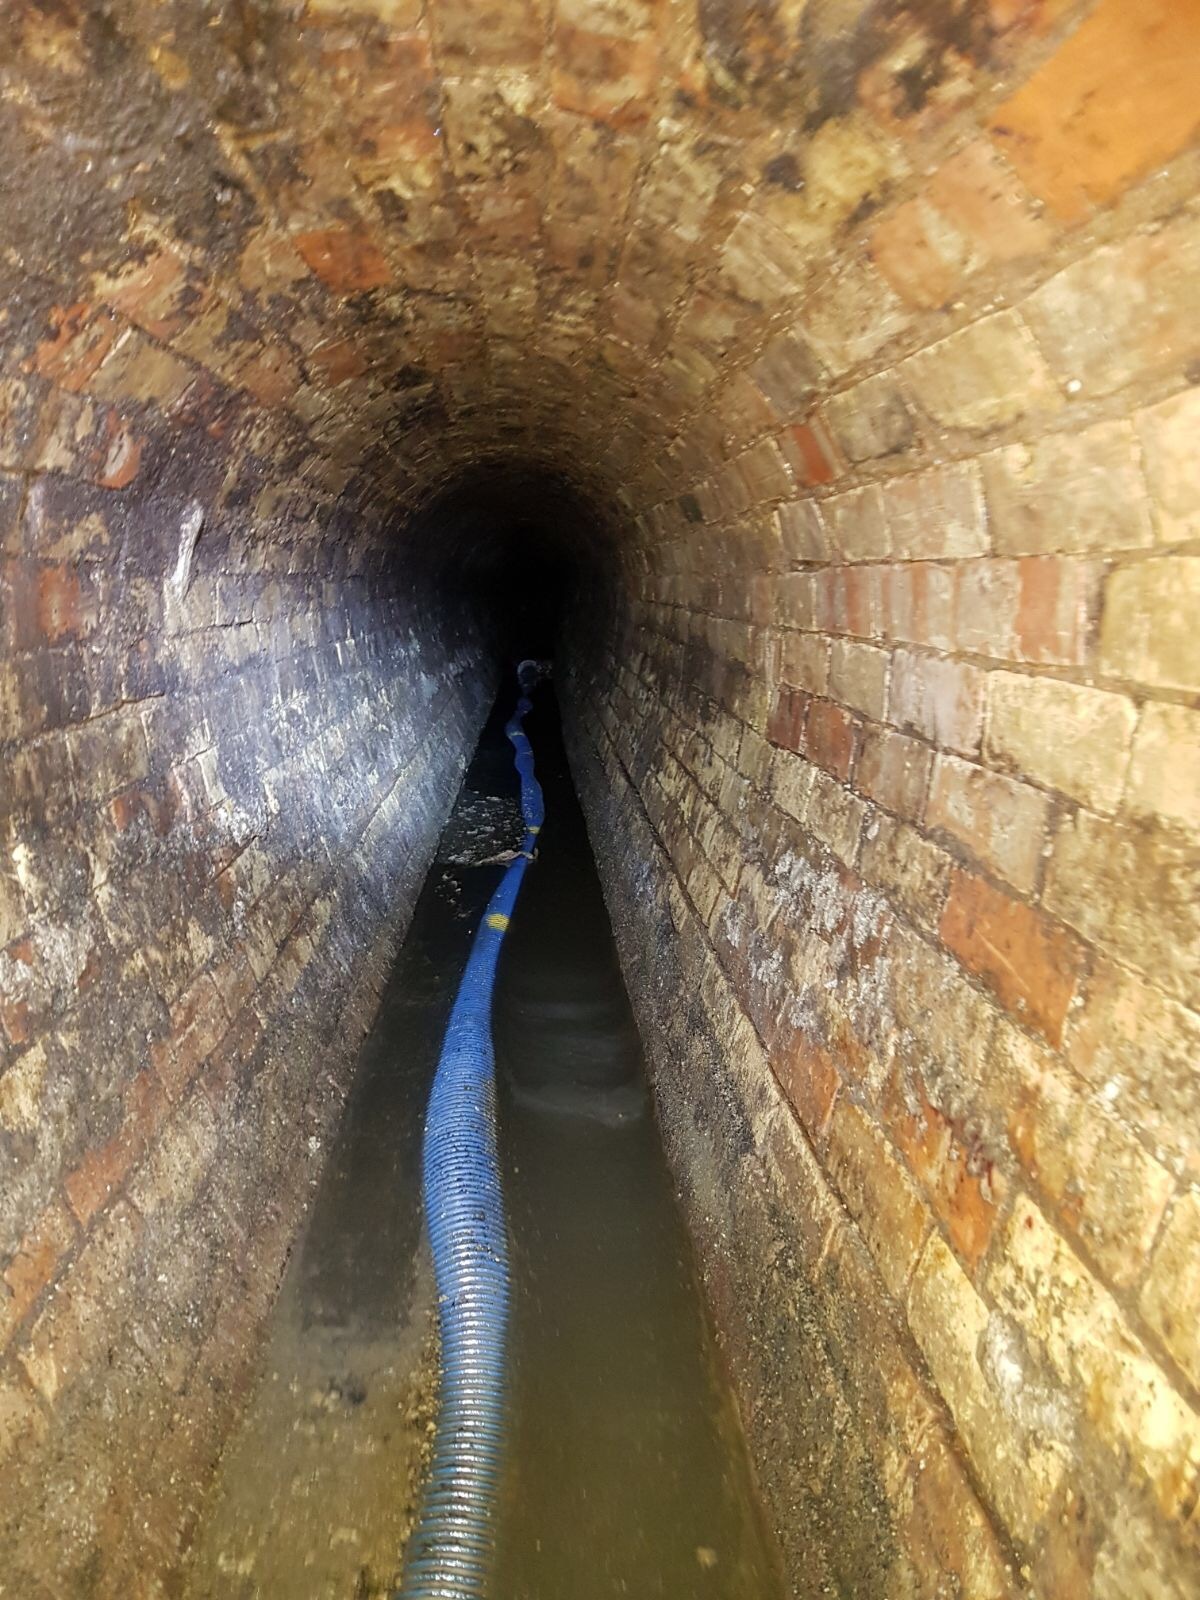 The sewer after the blockage had been completely cleared. (Photo by Thames Water)